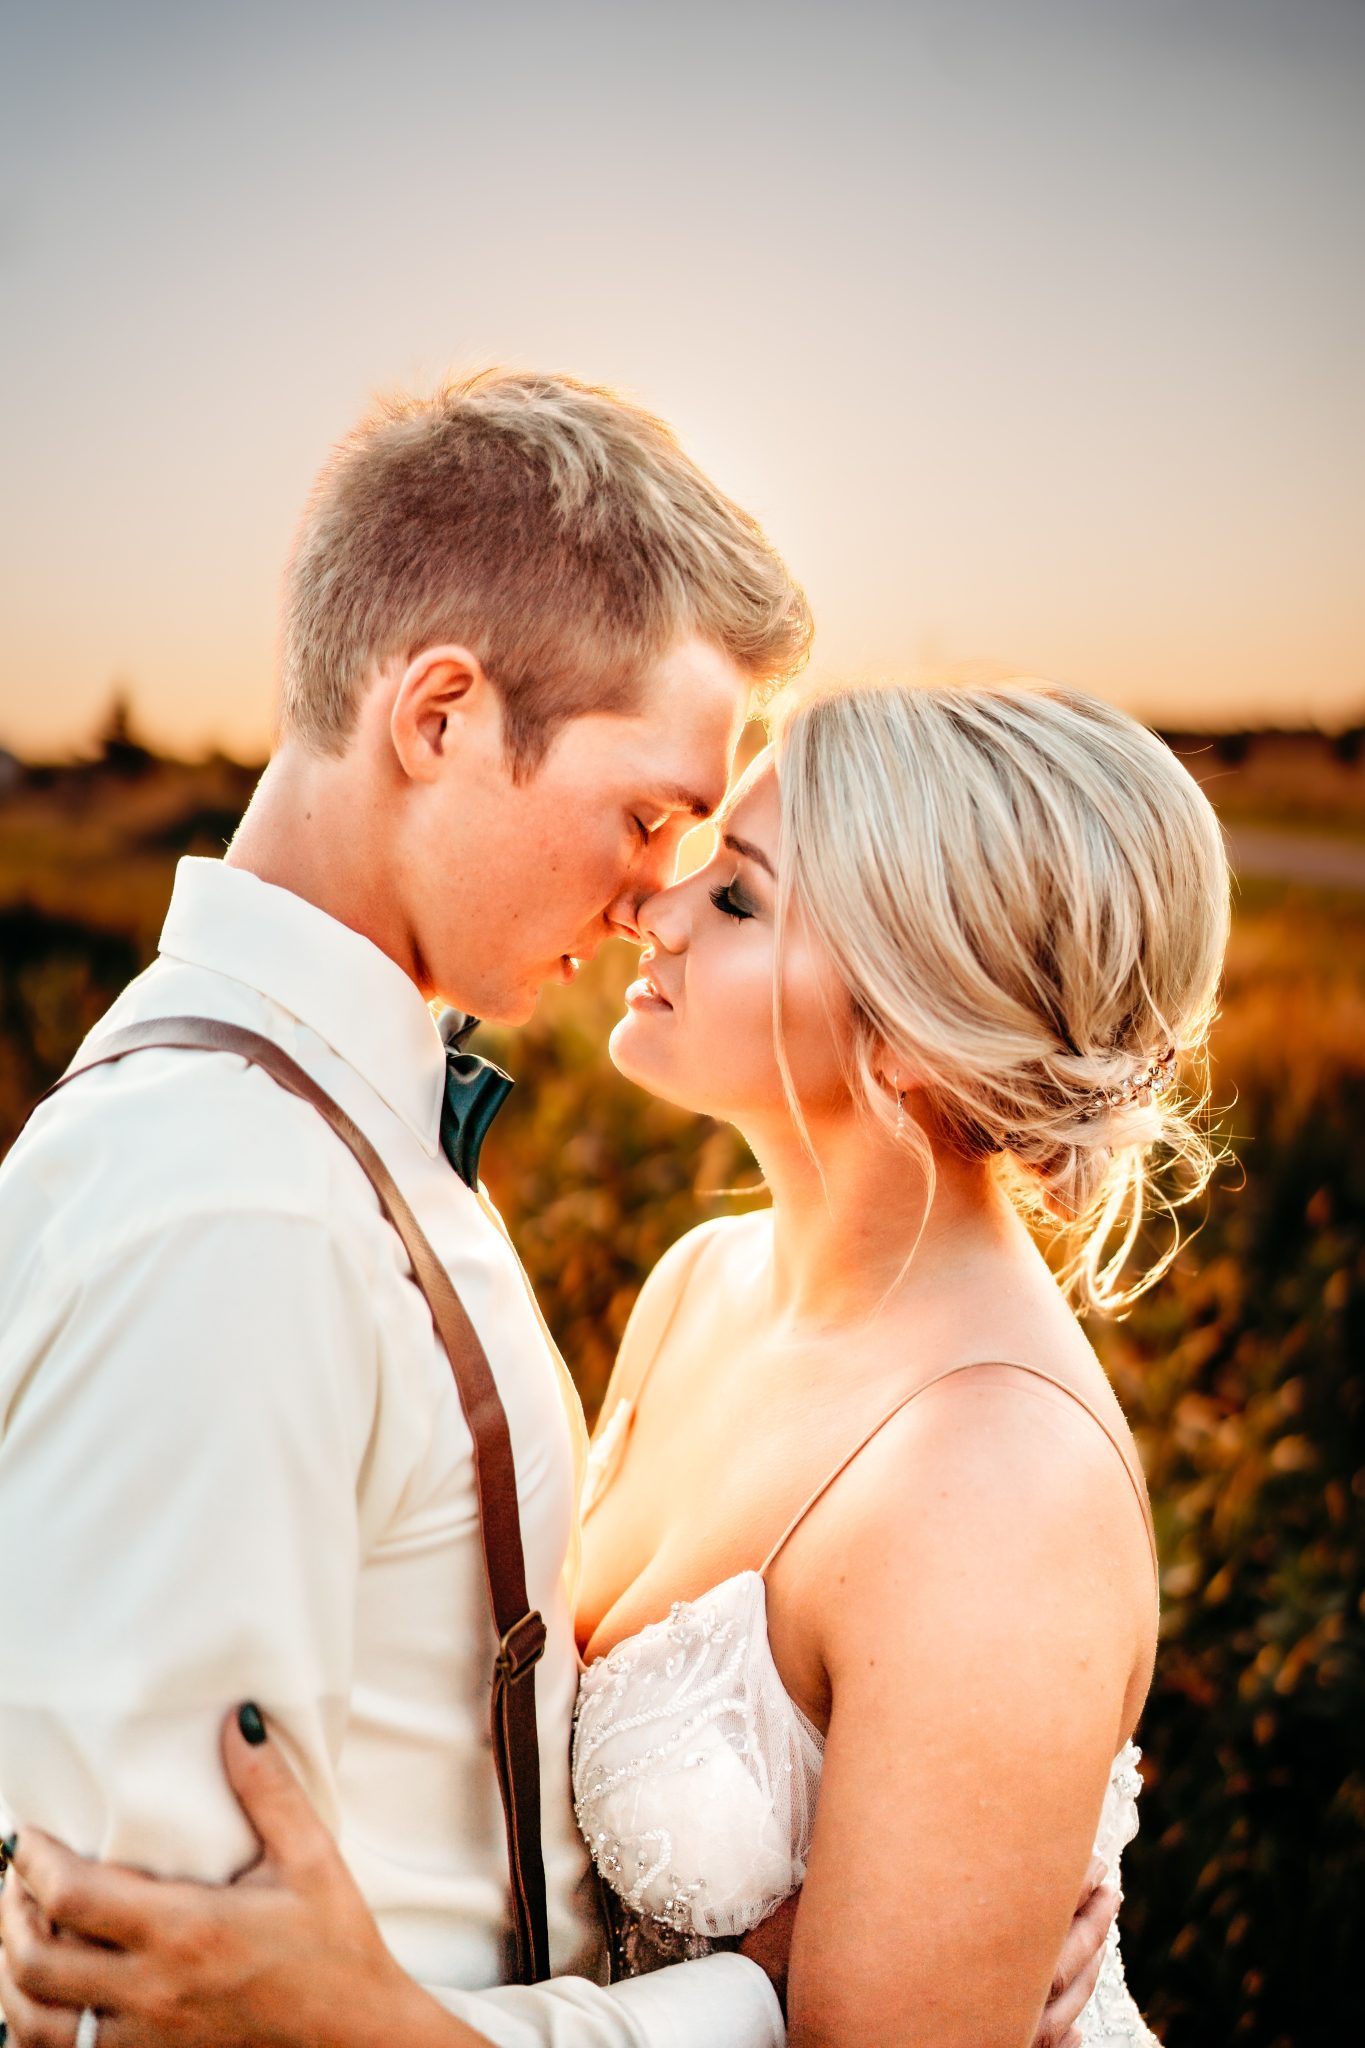 Spirit and Soul Photography is a wedding photographer in Alexandria MN